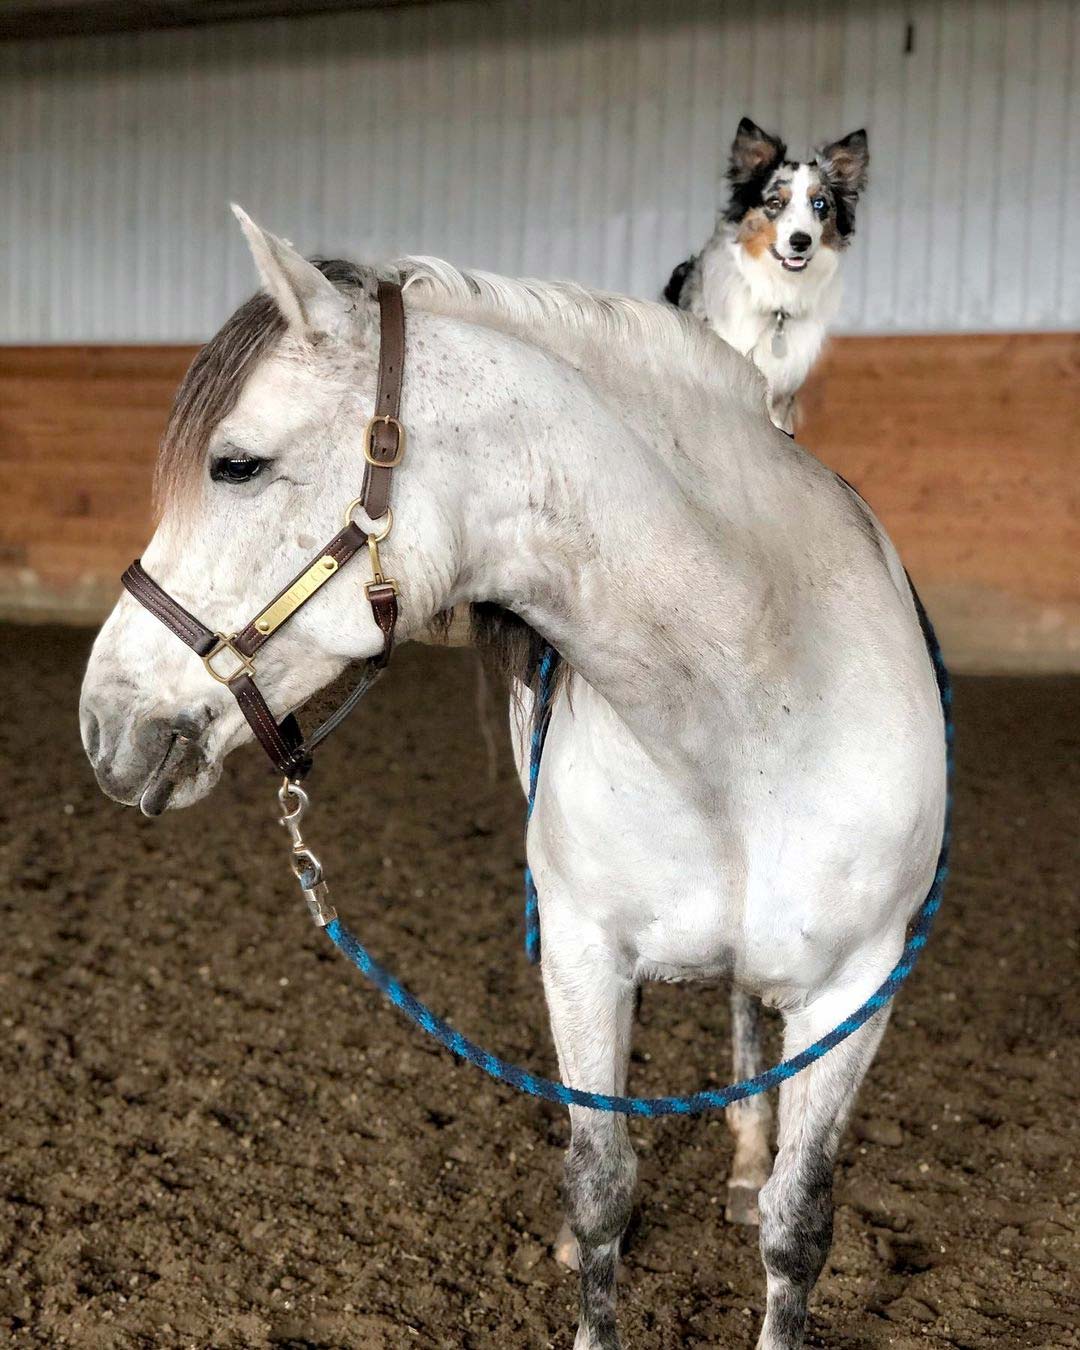 Dog loves riding his favorite horse